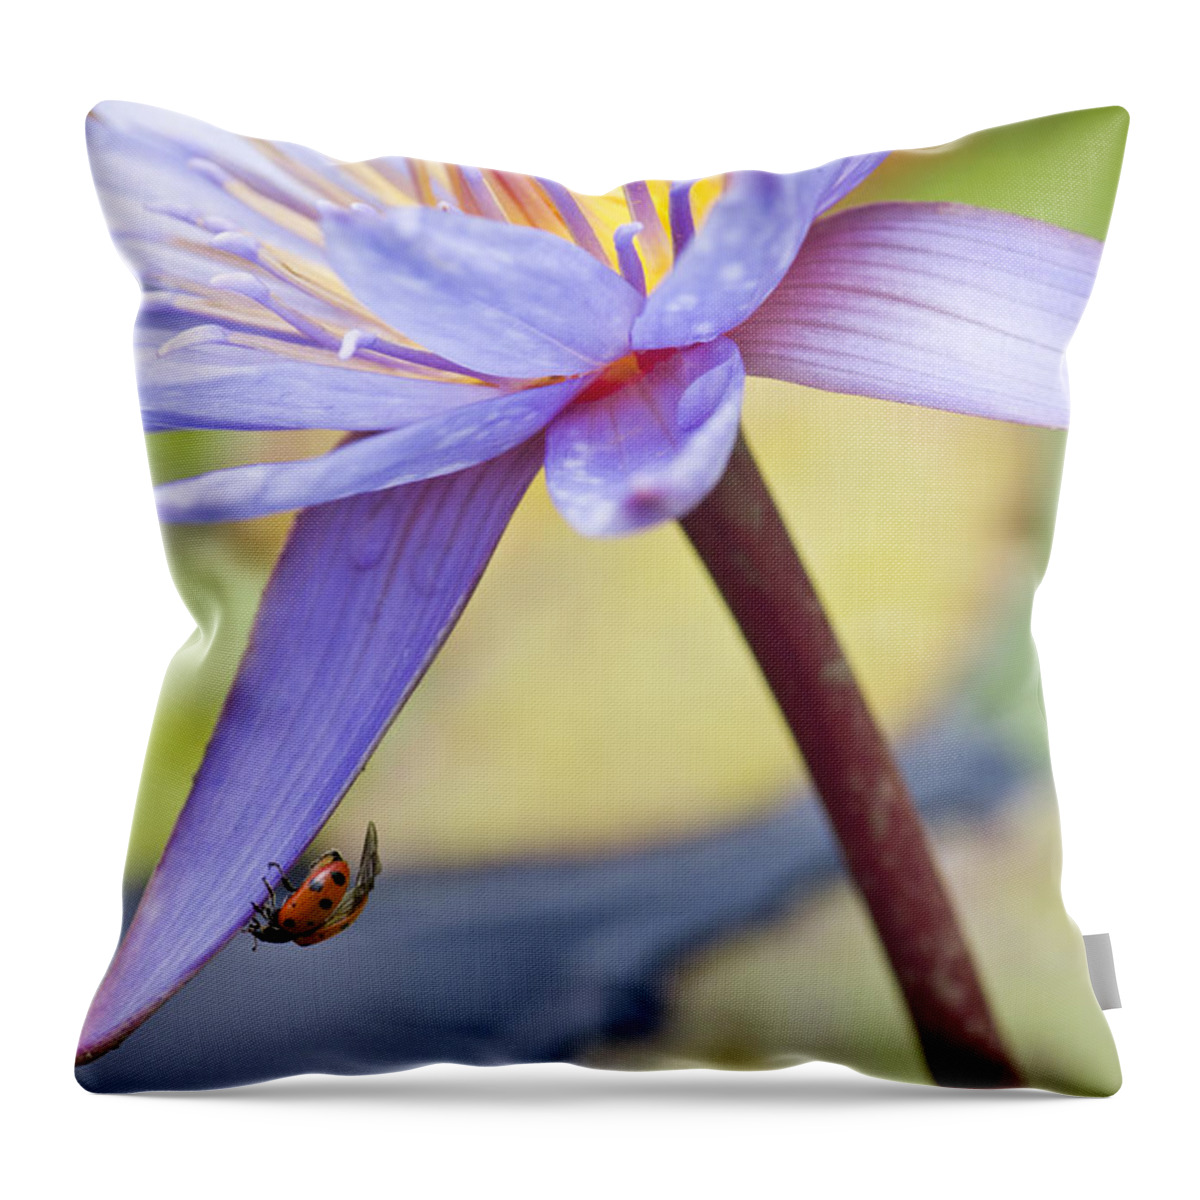 Ladybug Throw Pillow featuring the photograph A Visiting Lady by Priya Ghose